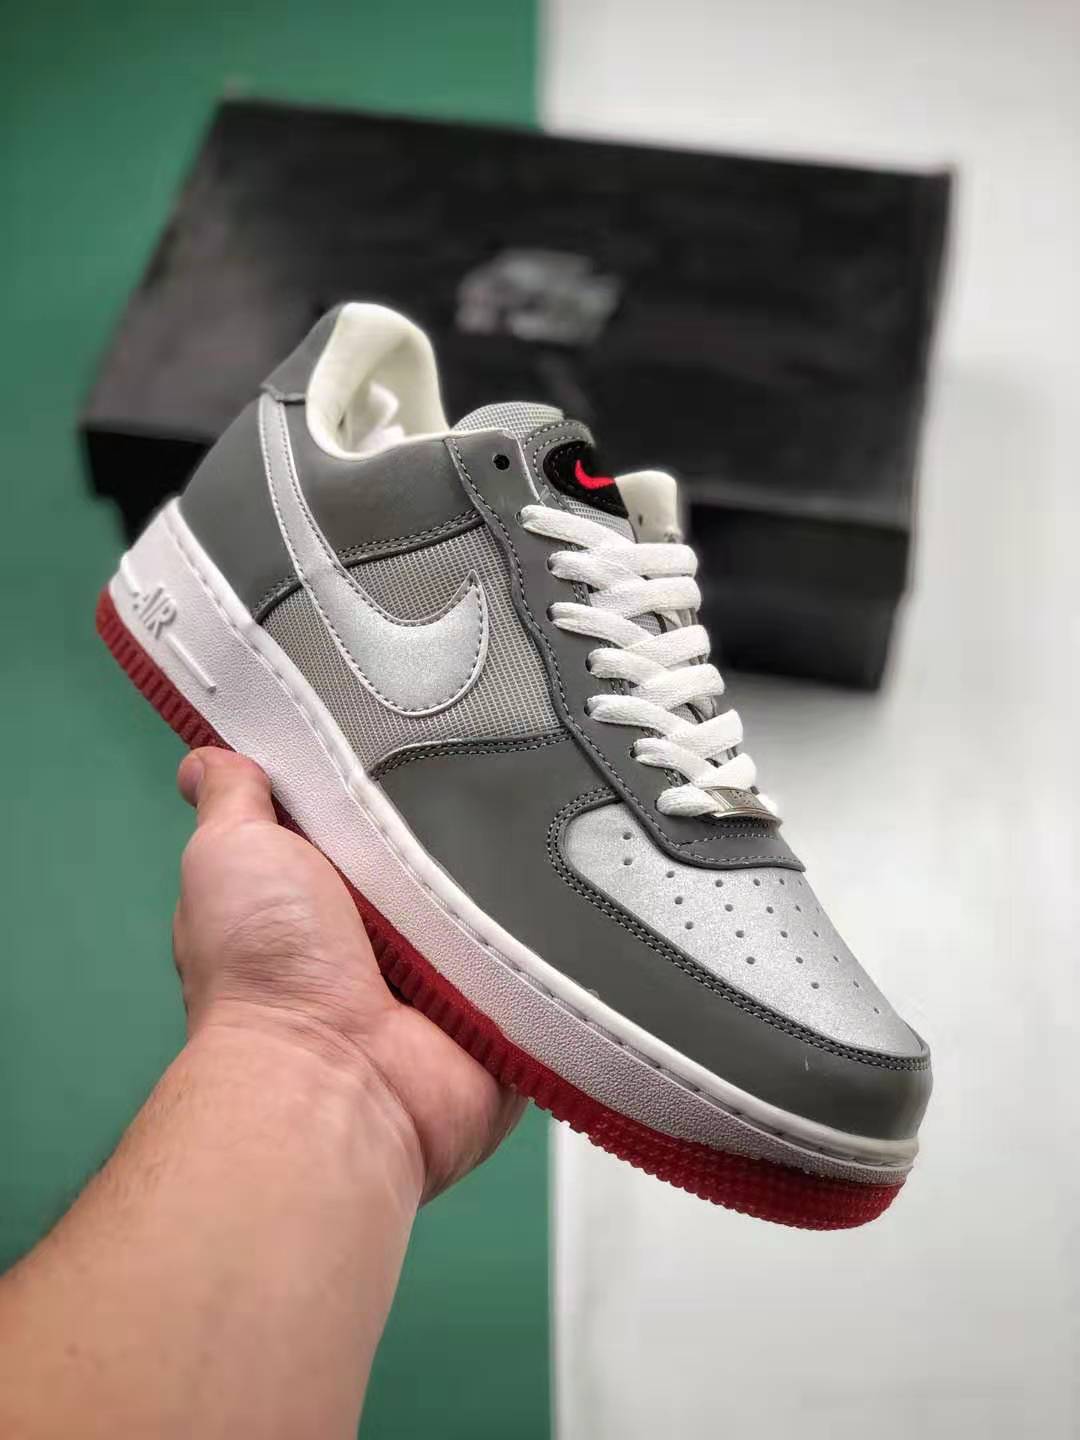 Nike Air Force 1 Premium Red Black Silver Varsity Metallic 316892-008 - Stylish and Trendy Footwear for Men's Fashion